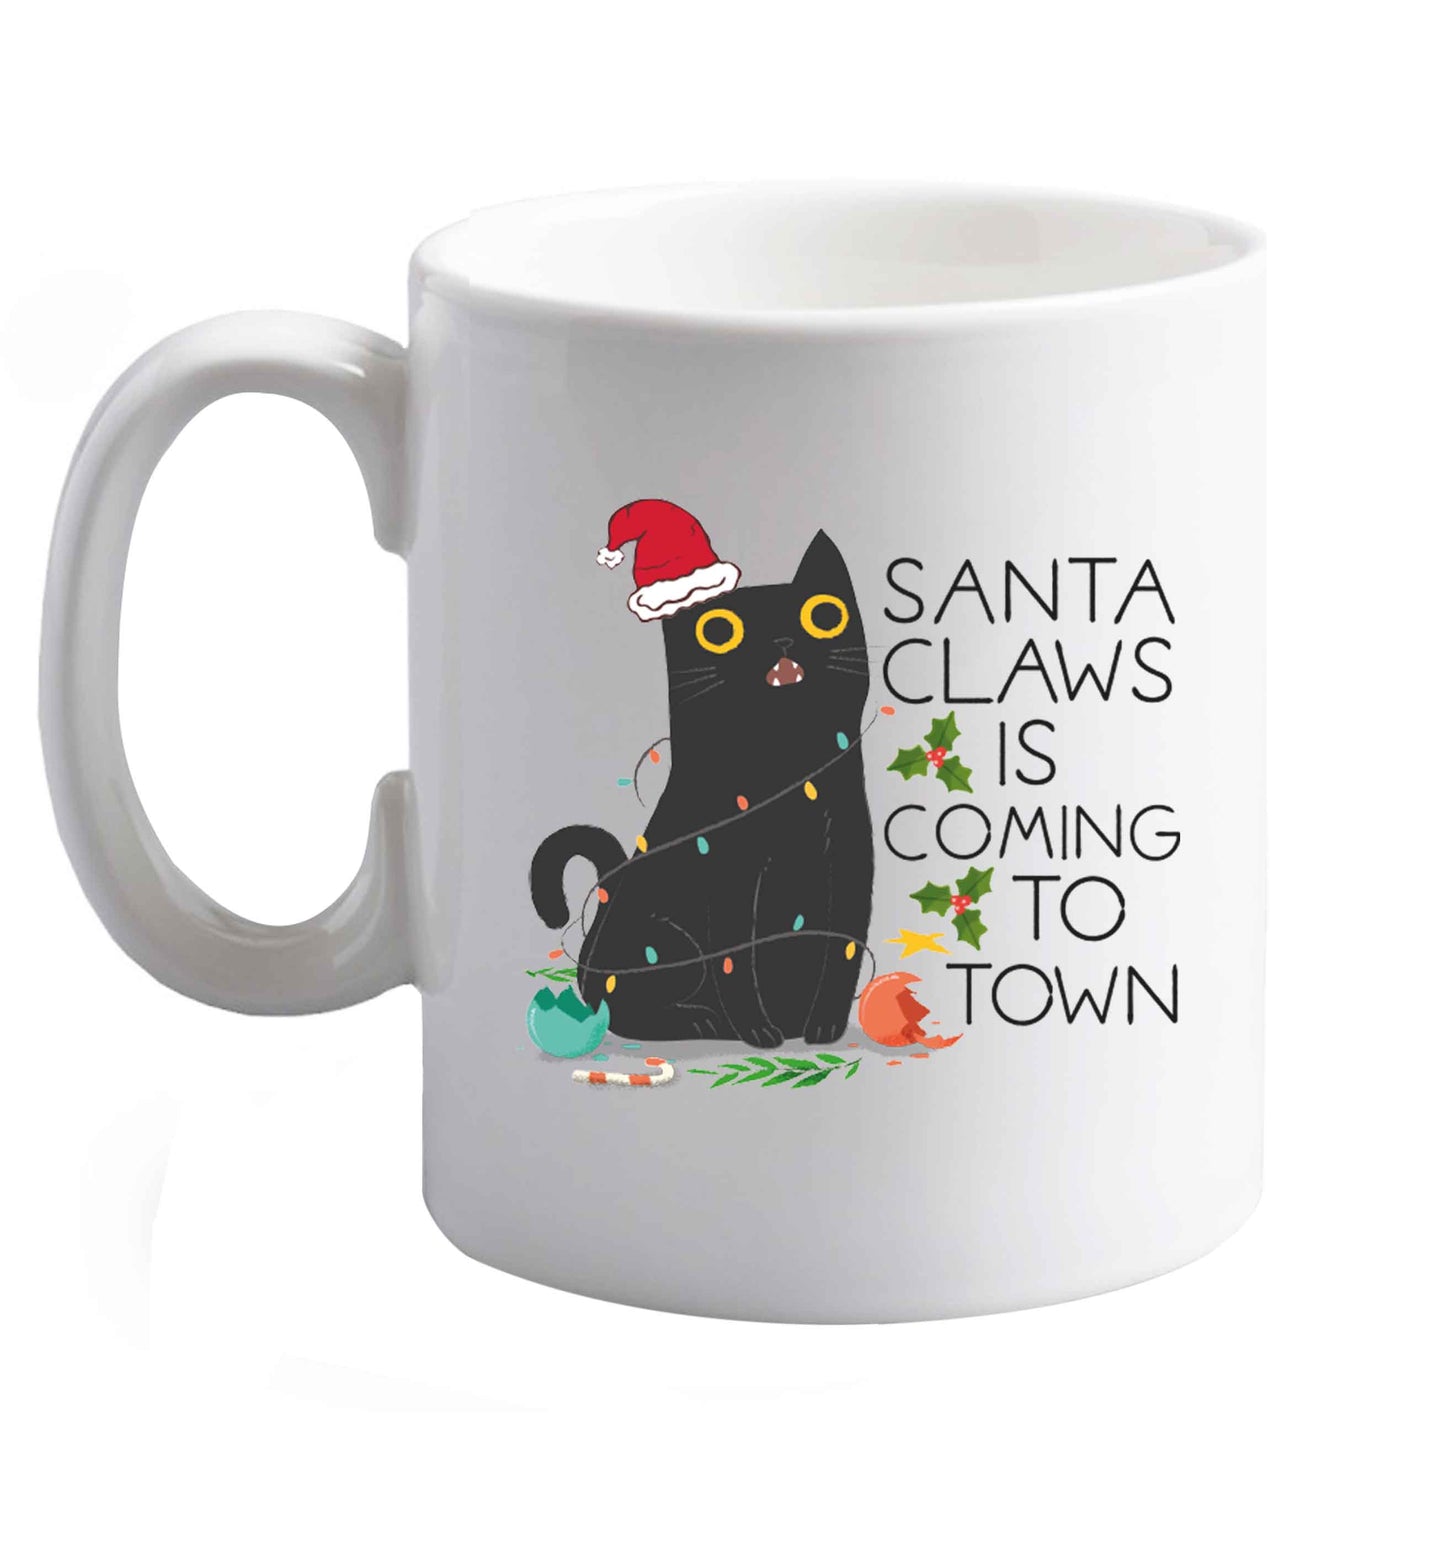 10 oz Santa claws is coming to town  ceramic mug right handed